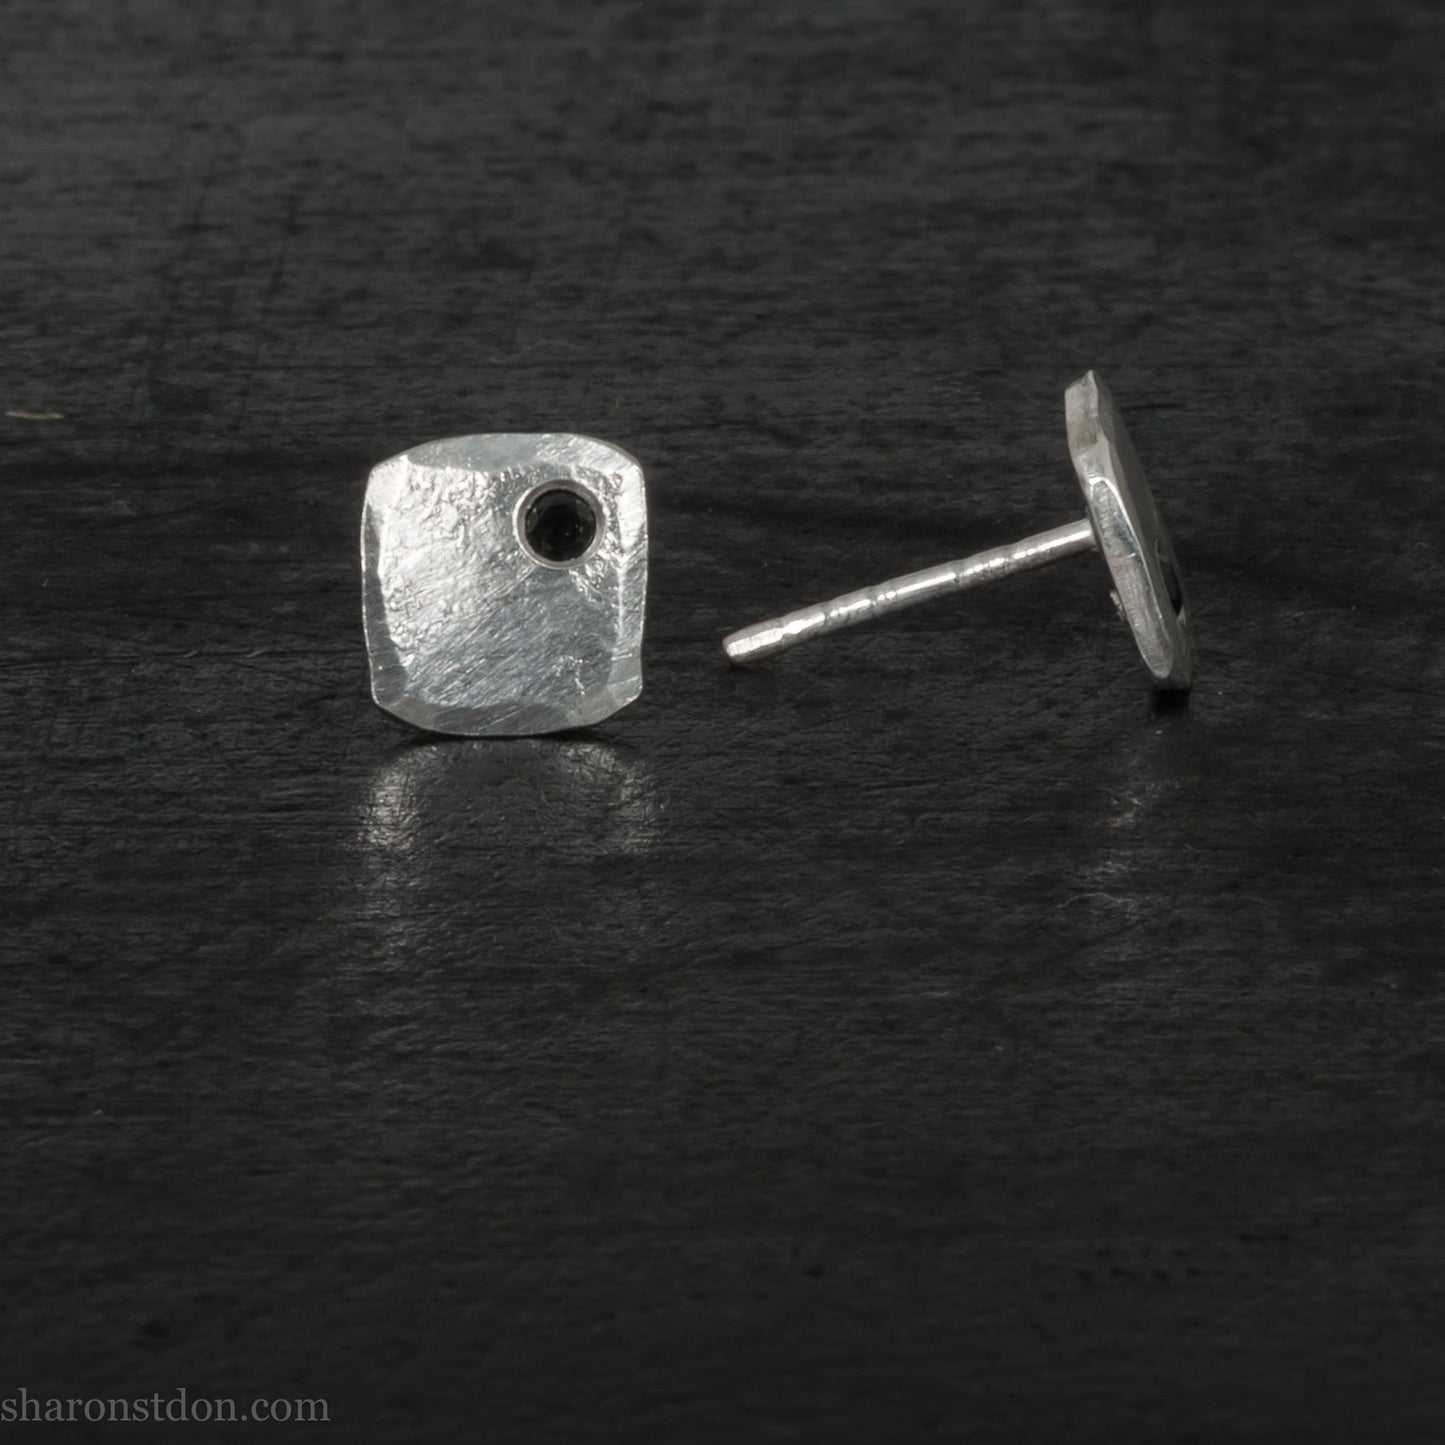 7mm x 7mm Handmade 925 sterling silver stud earrings with black spinel gemstone in the corner. Shiny, small square stud earrings made by Sharon SaintDon in North America.